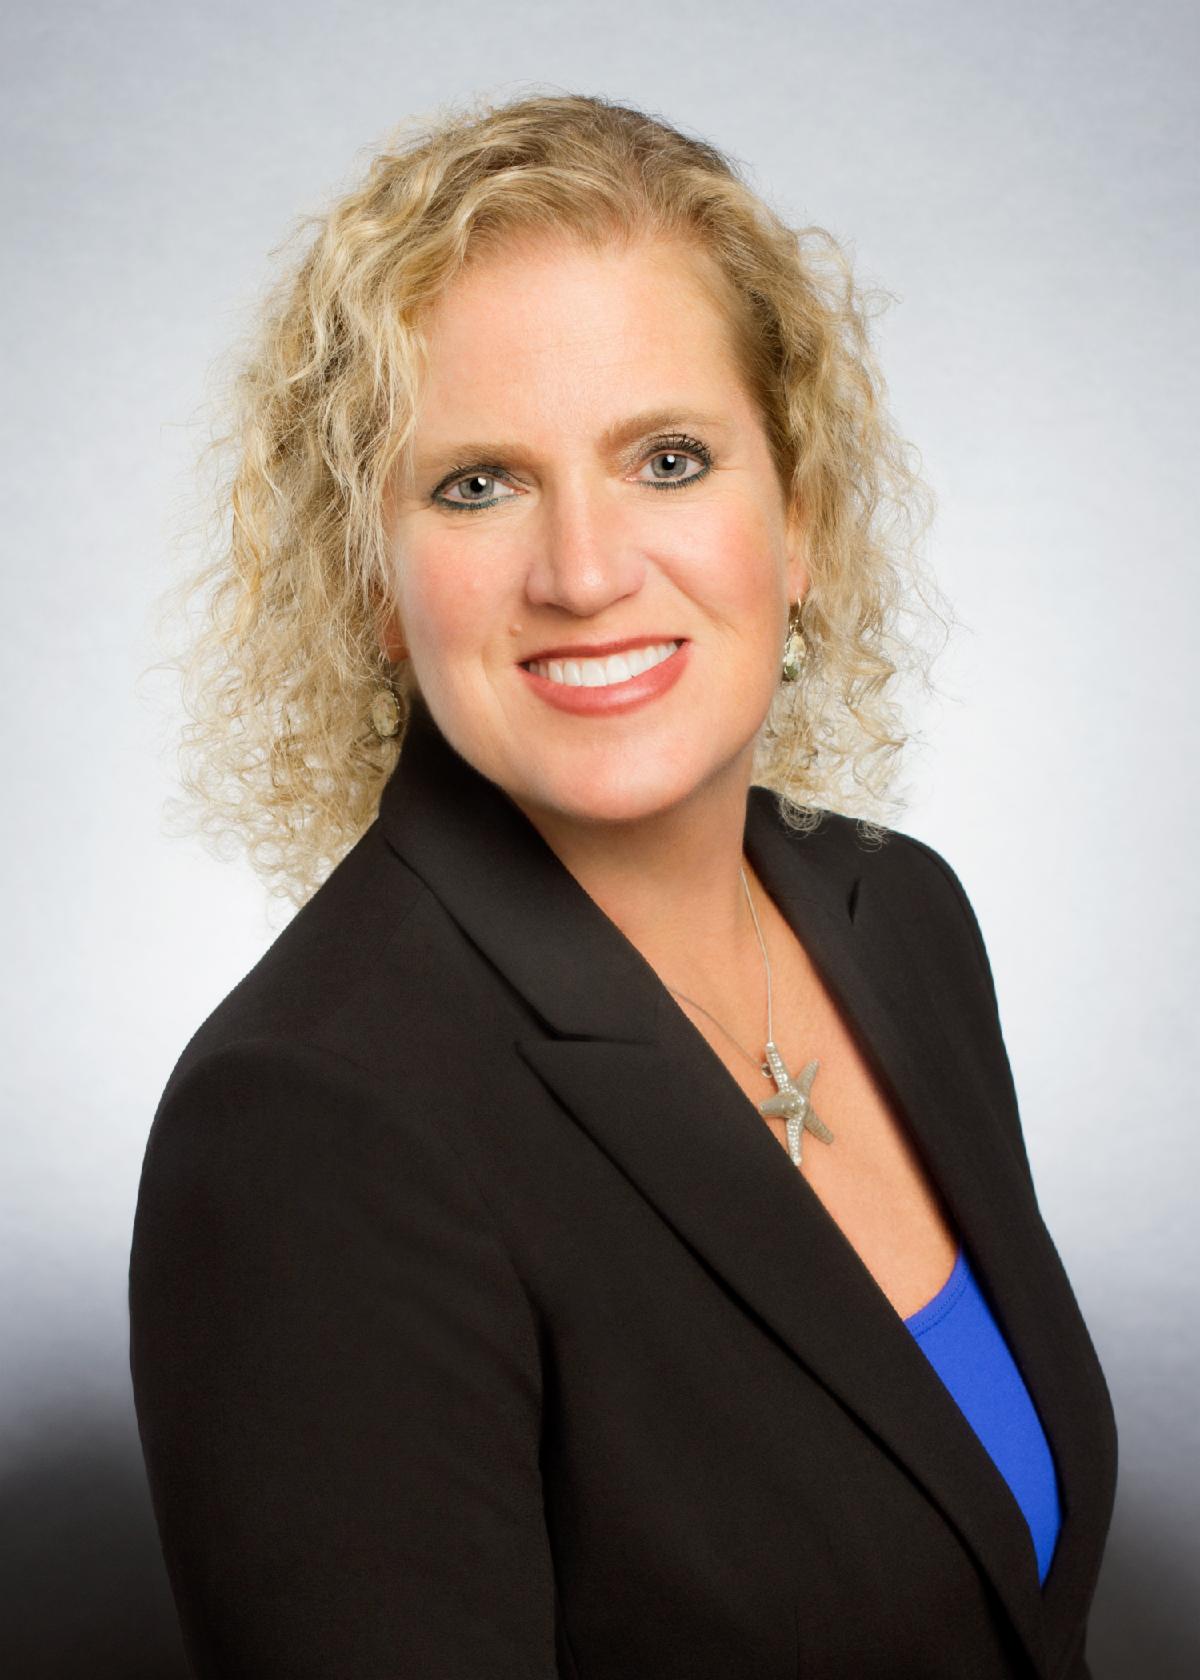 WEST, a Williston Financial Group Company, has appointed long-time industry professional Darcy Patch as vice president of marketing, lender services where she will lead the marketing and communications strategies for WFG's Enterprise Solutions Group